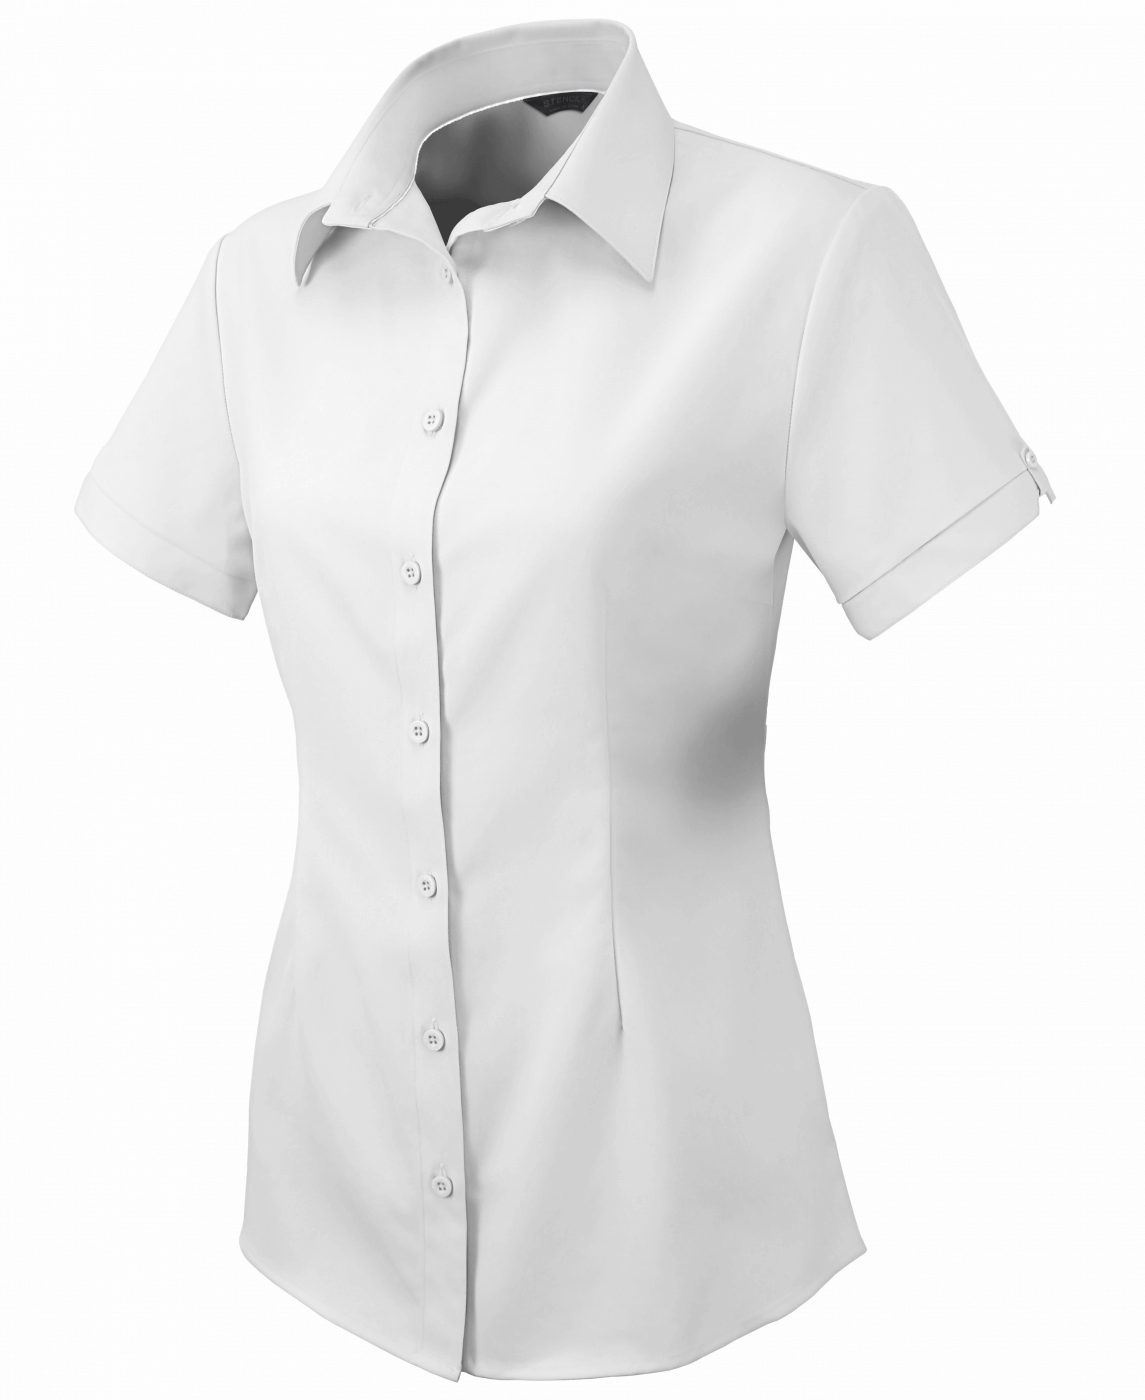 2135S CANDIDATE SHIRT S/S - LADIES